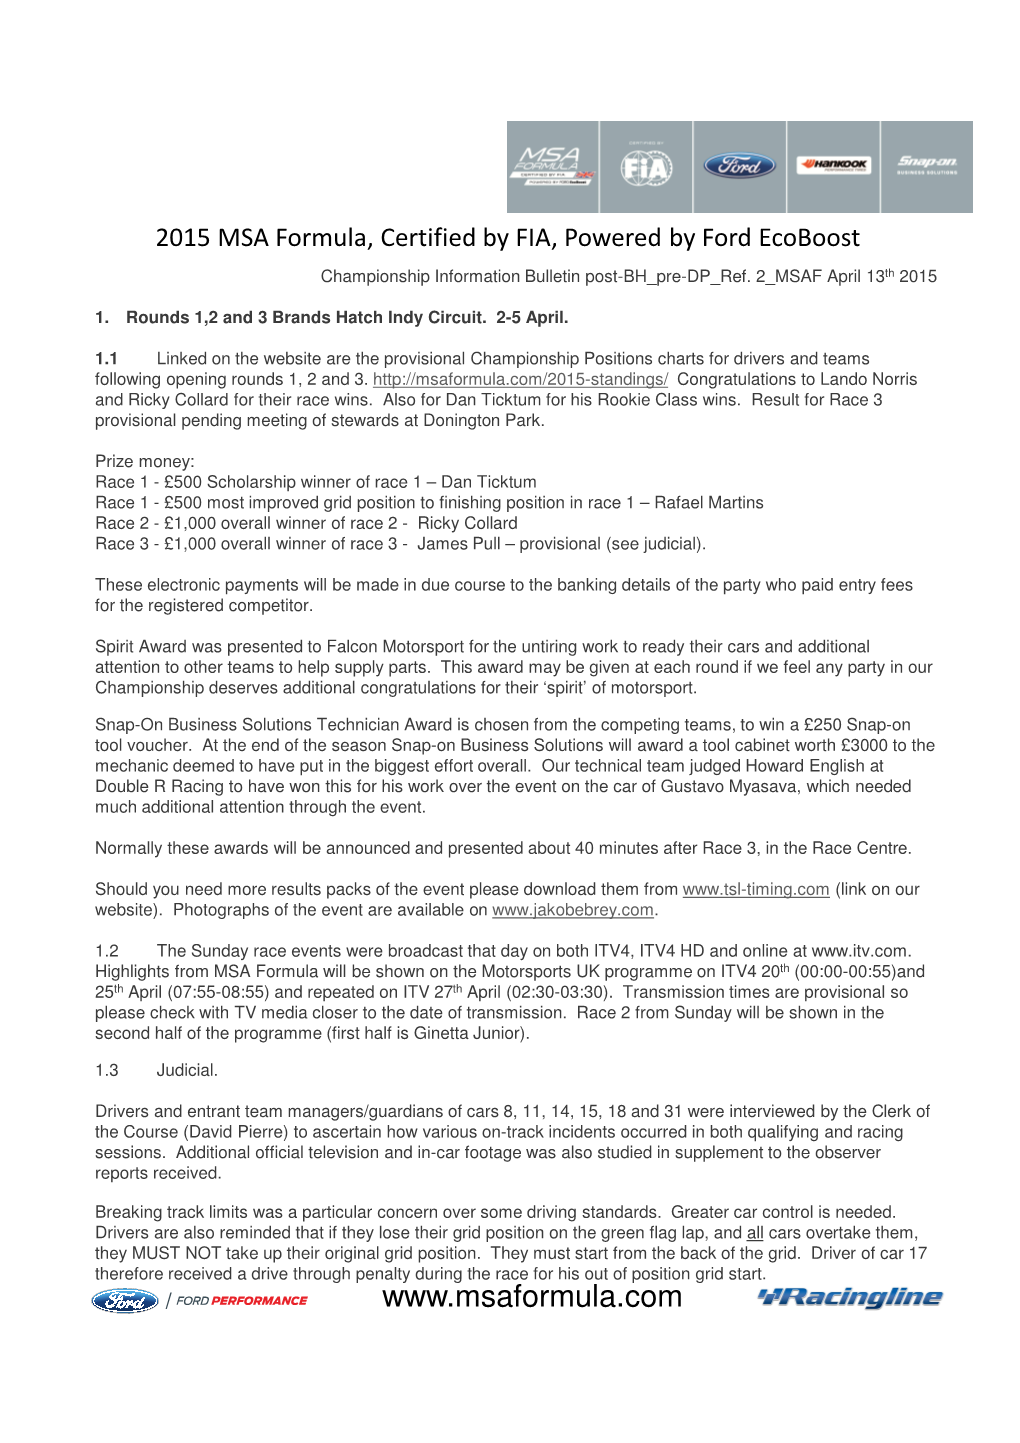 2015 MSA Formula, Certified by FIA, Powered by Ford Ecoboost